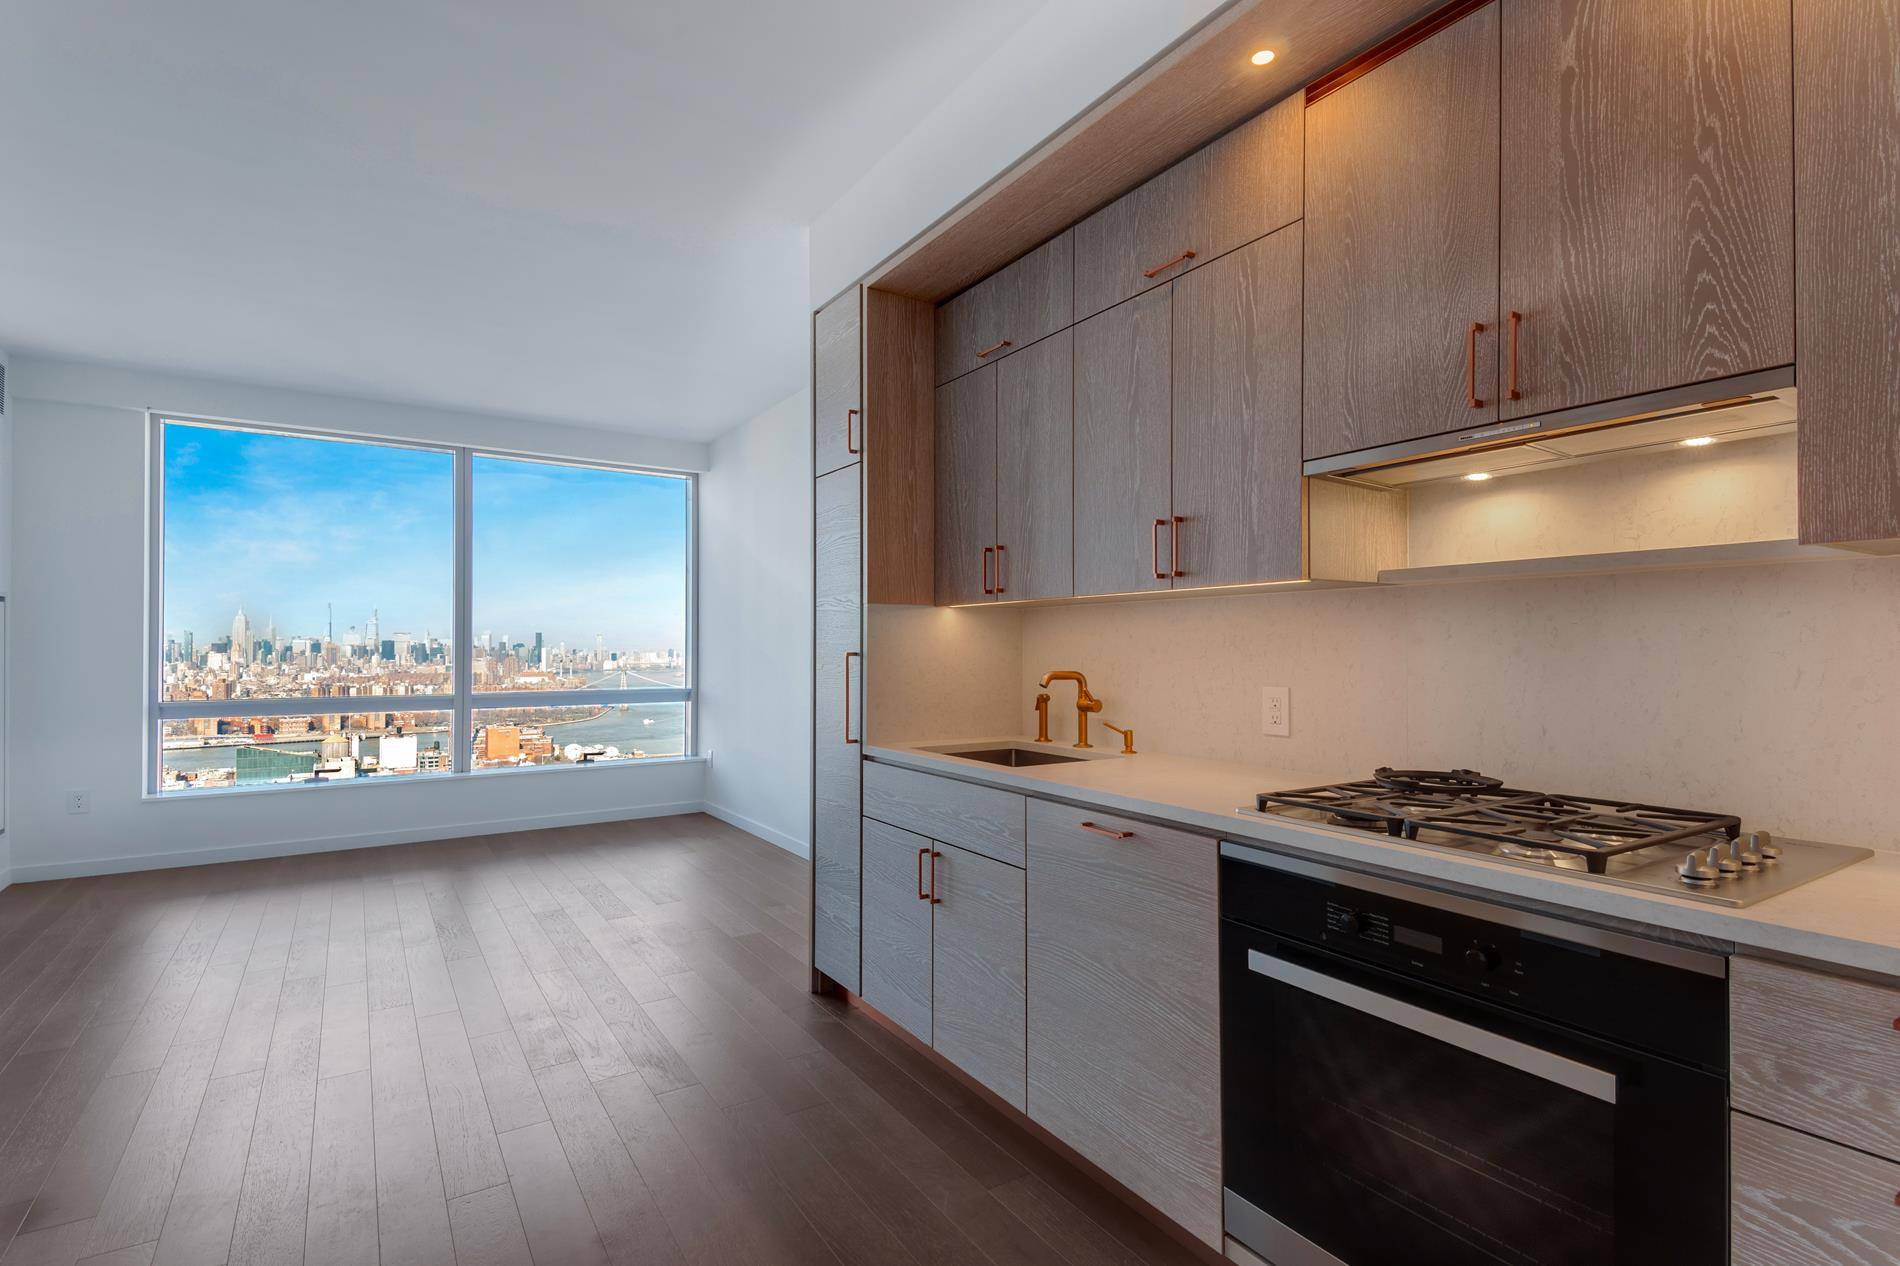 Residence 50C is a spacious, two bedroom home with oversized windows and unparalleled views of the Manhattan skyline and waterways.